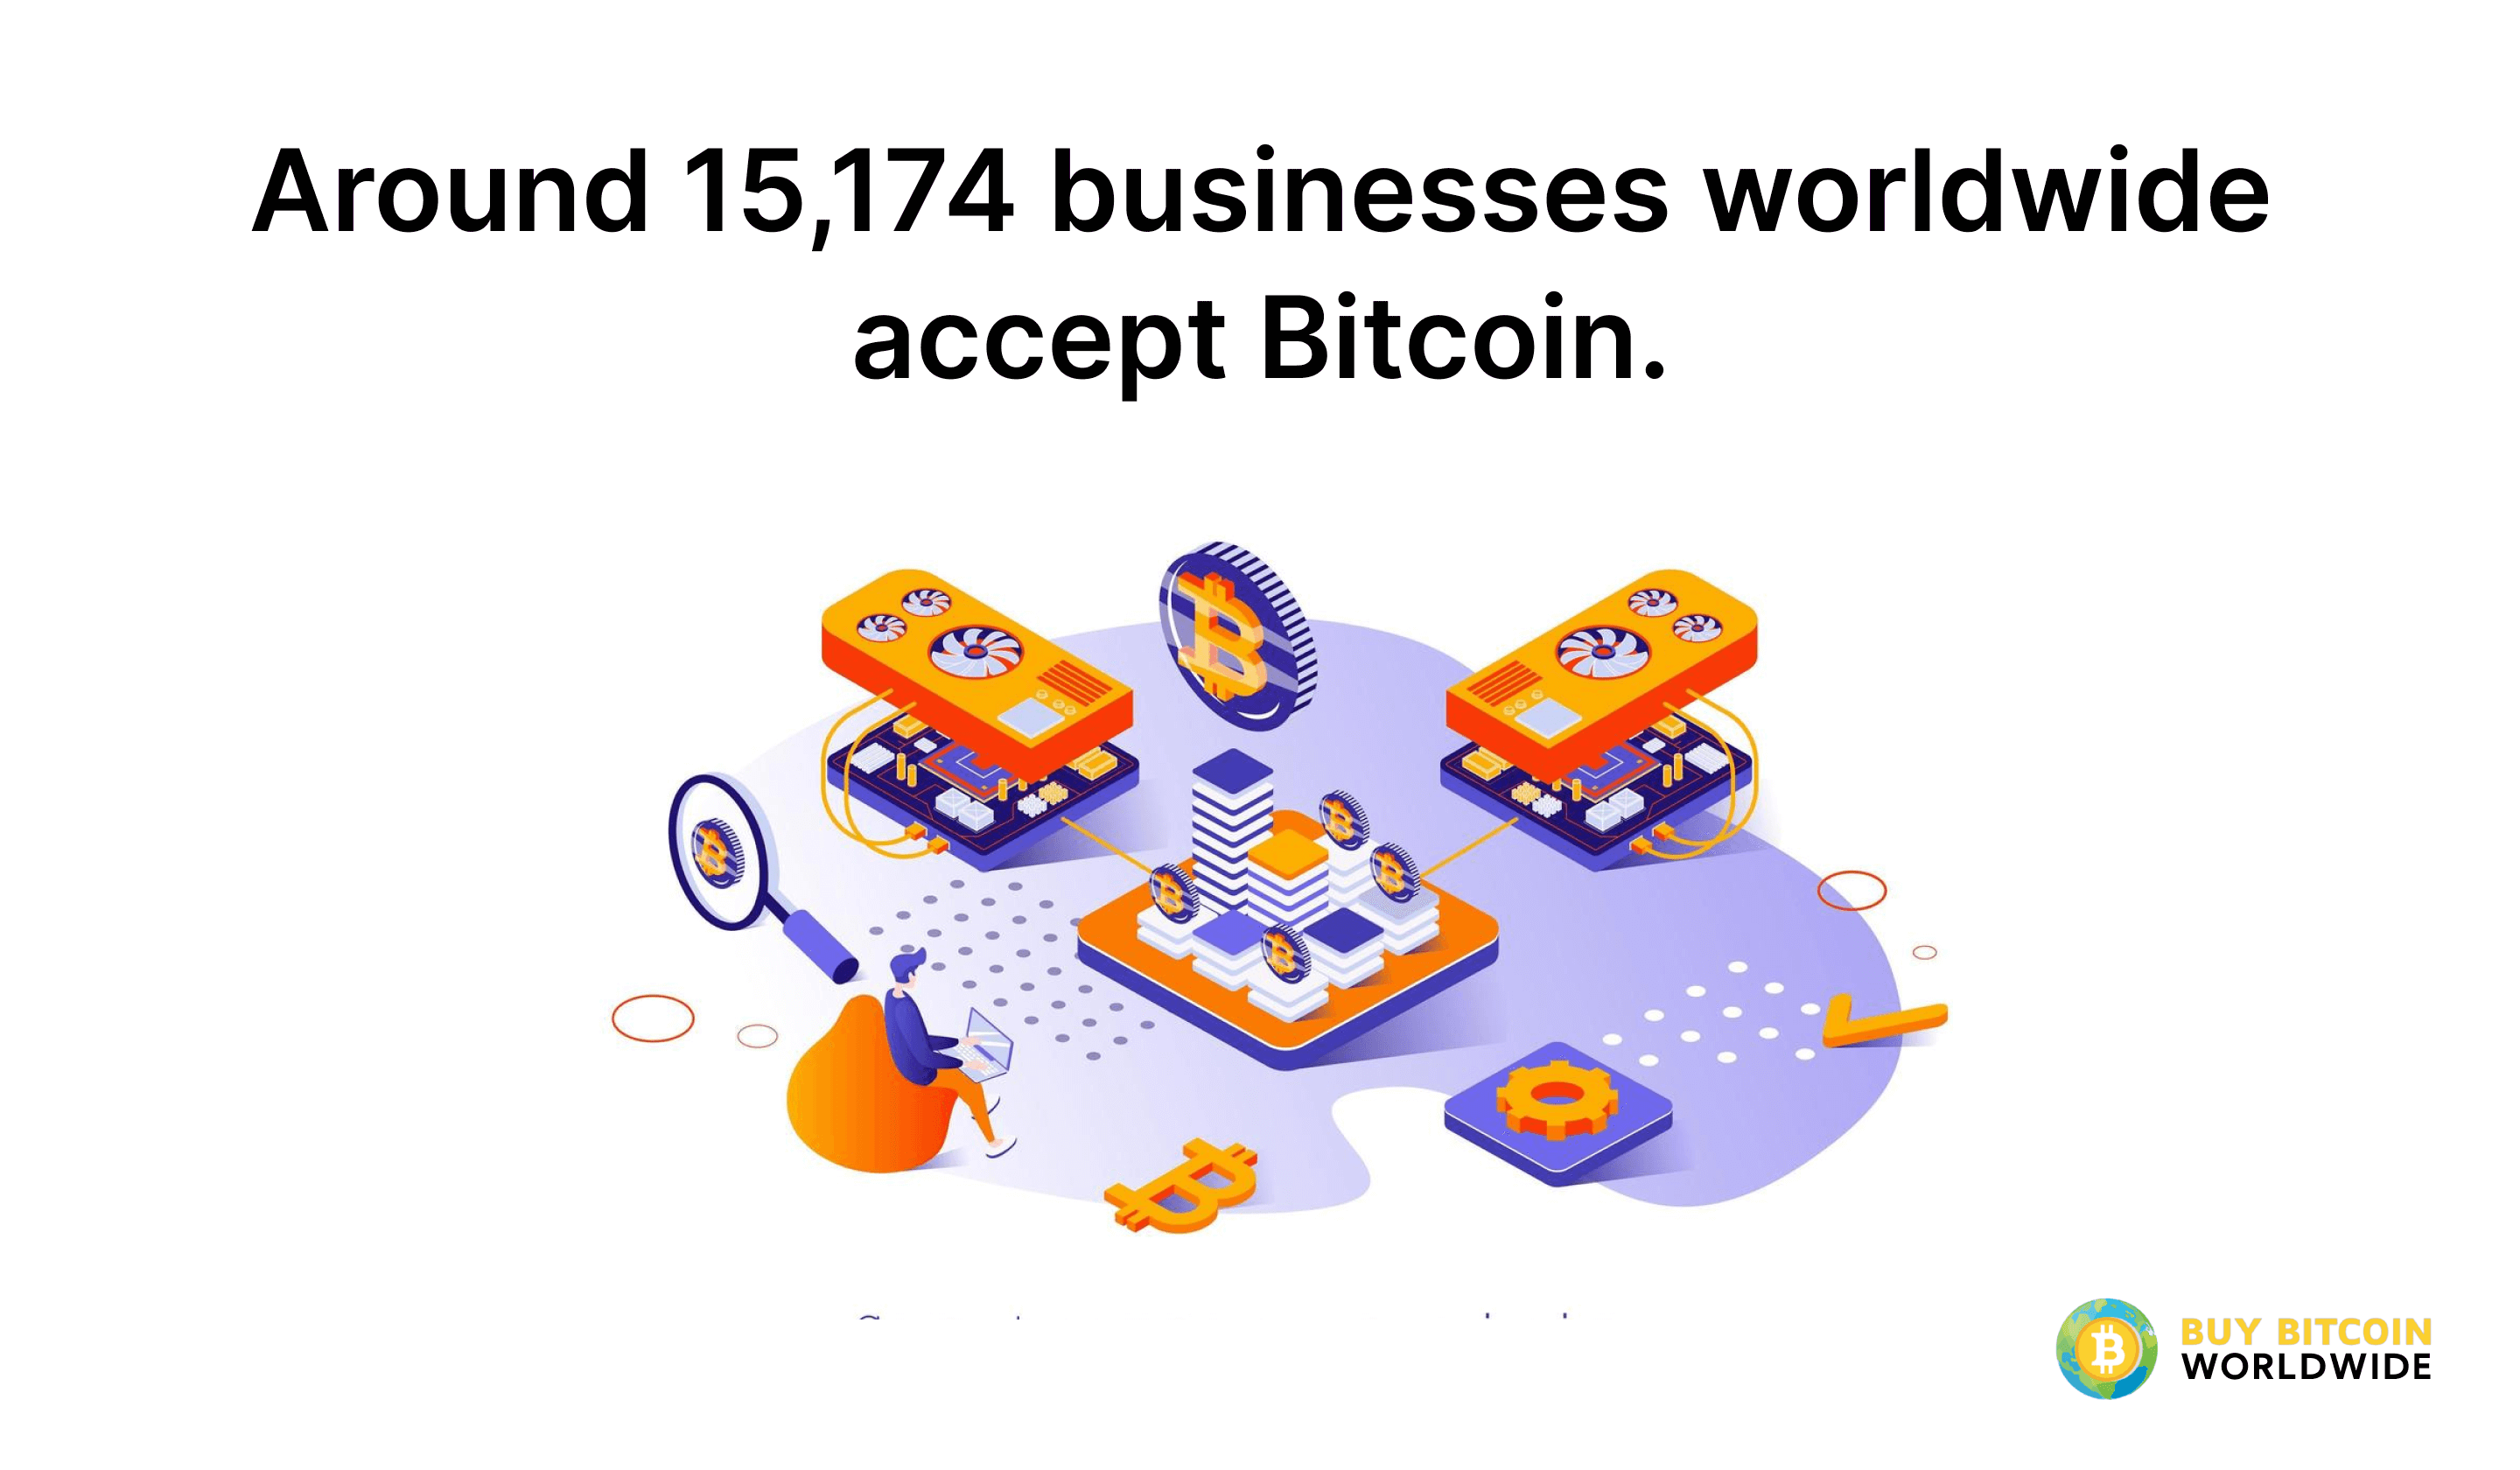 how many businesses accept bitcoin worldwide